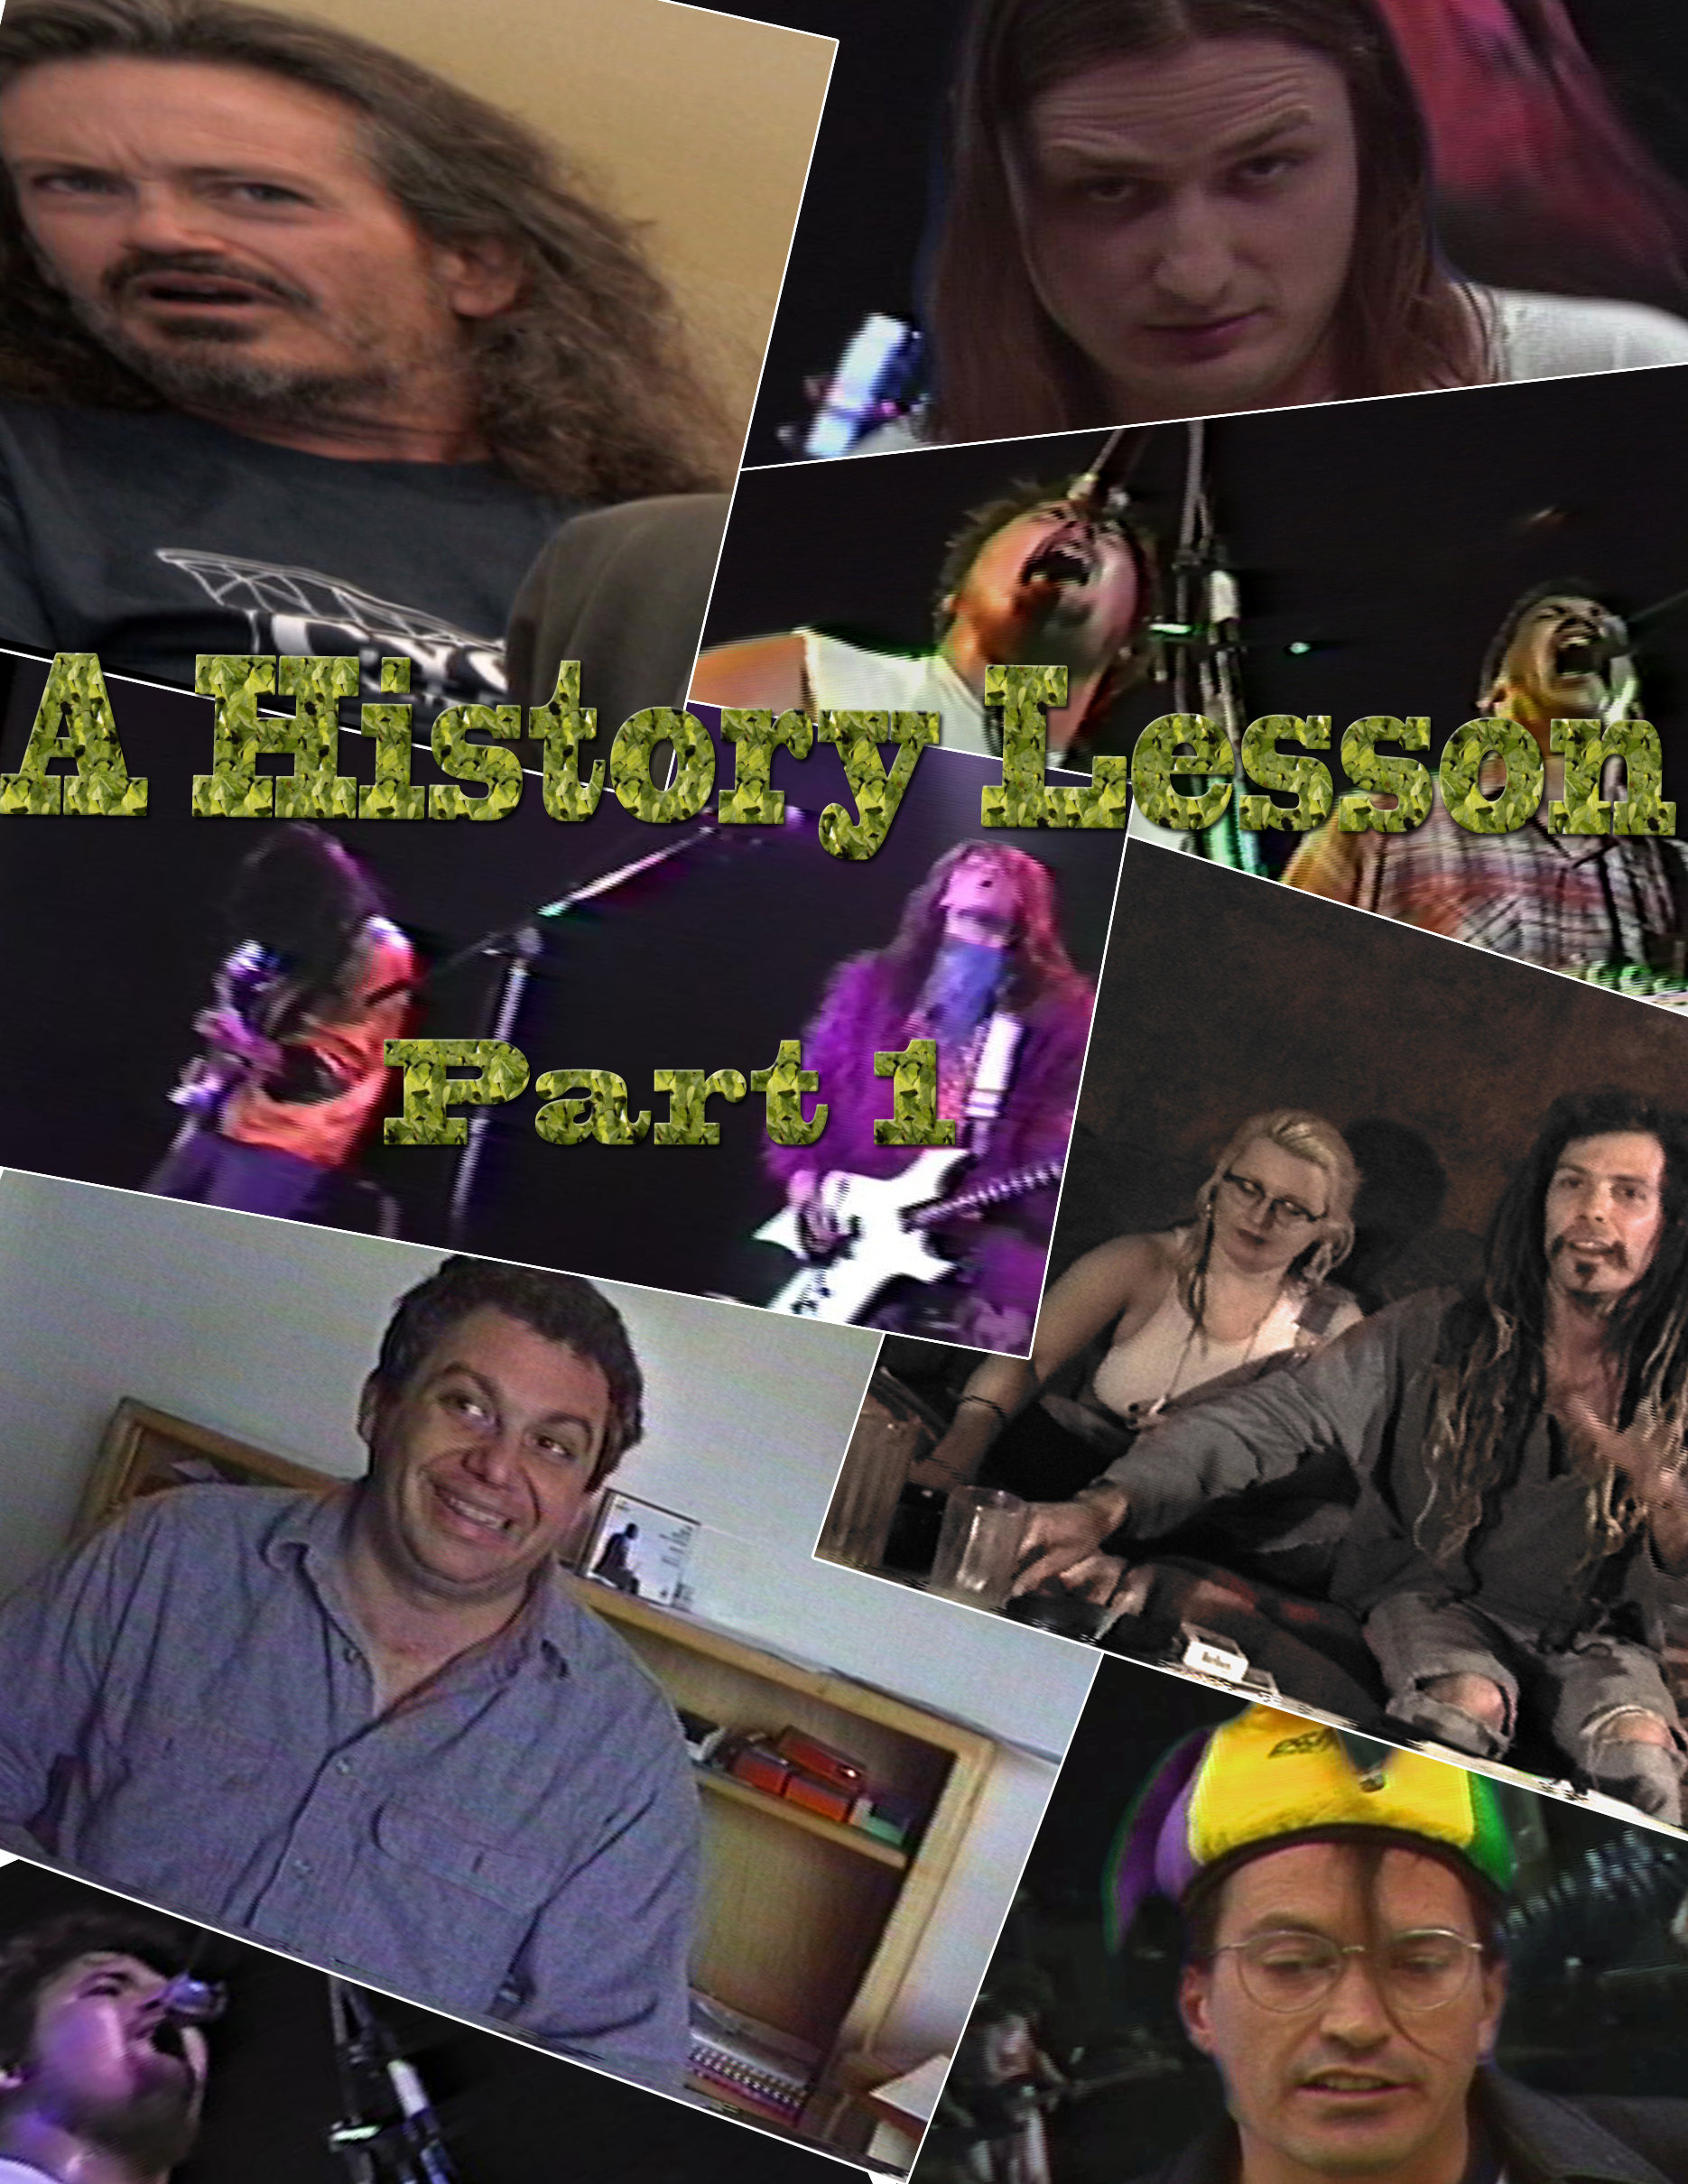 A History Lesson Part 1 by Dave Travis featuring the Minutemen, Meat Puppets, Redd Kross, and Twisted Roots